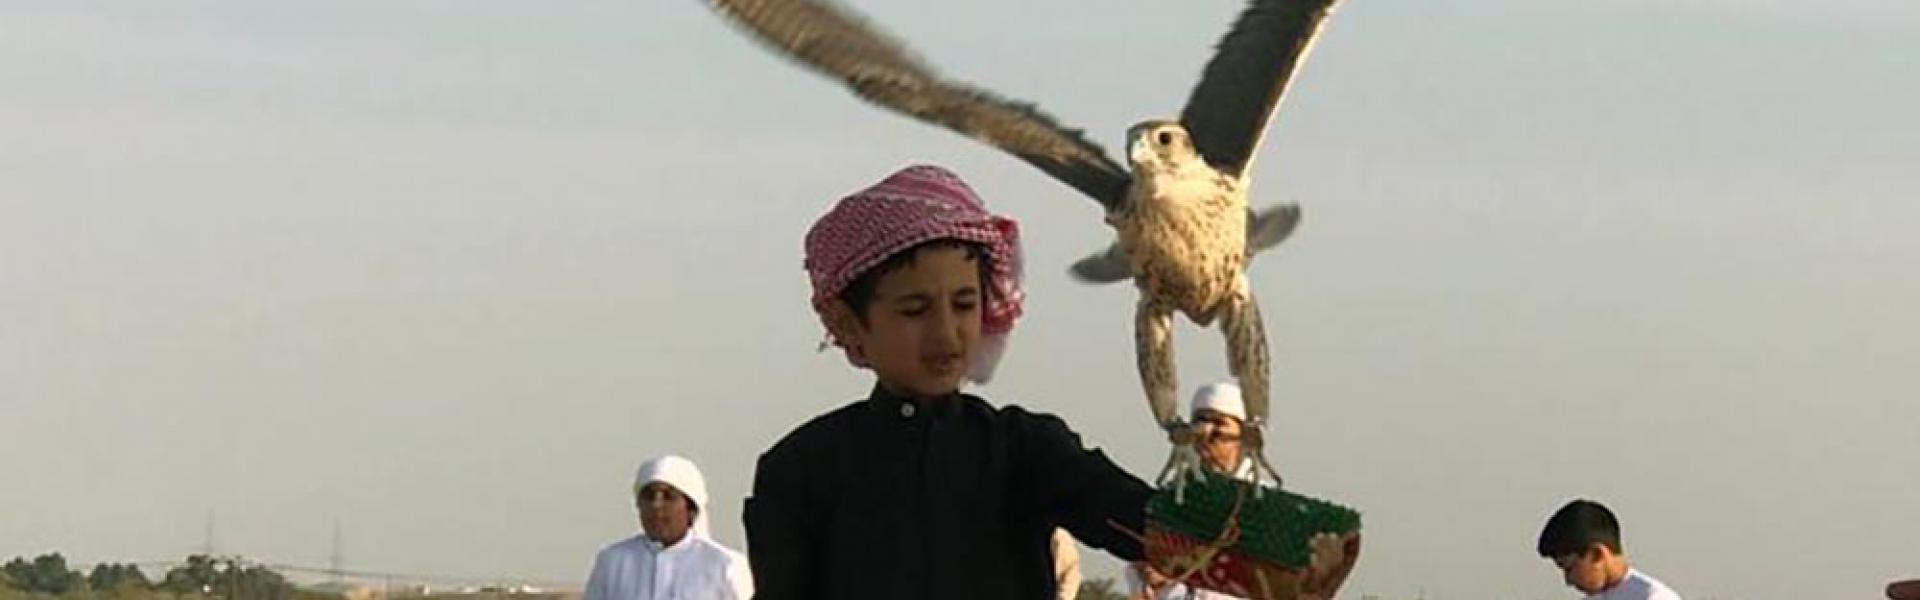 Falconry in the UAE preserved throughout generations